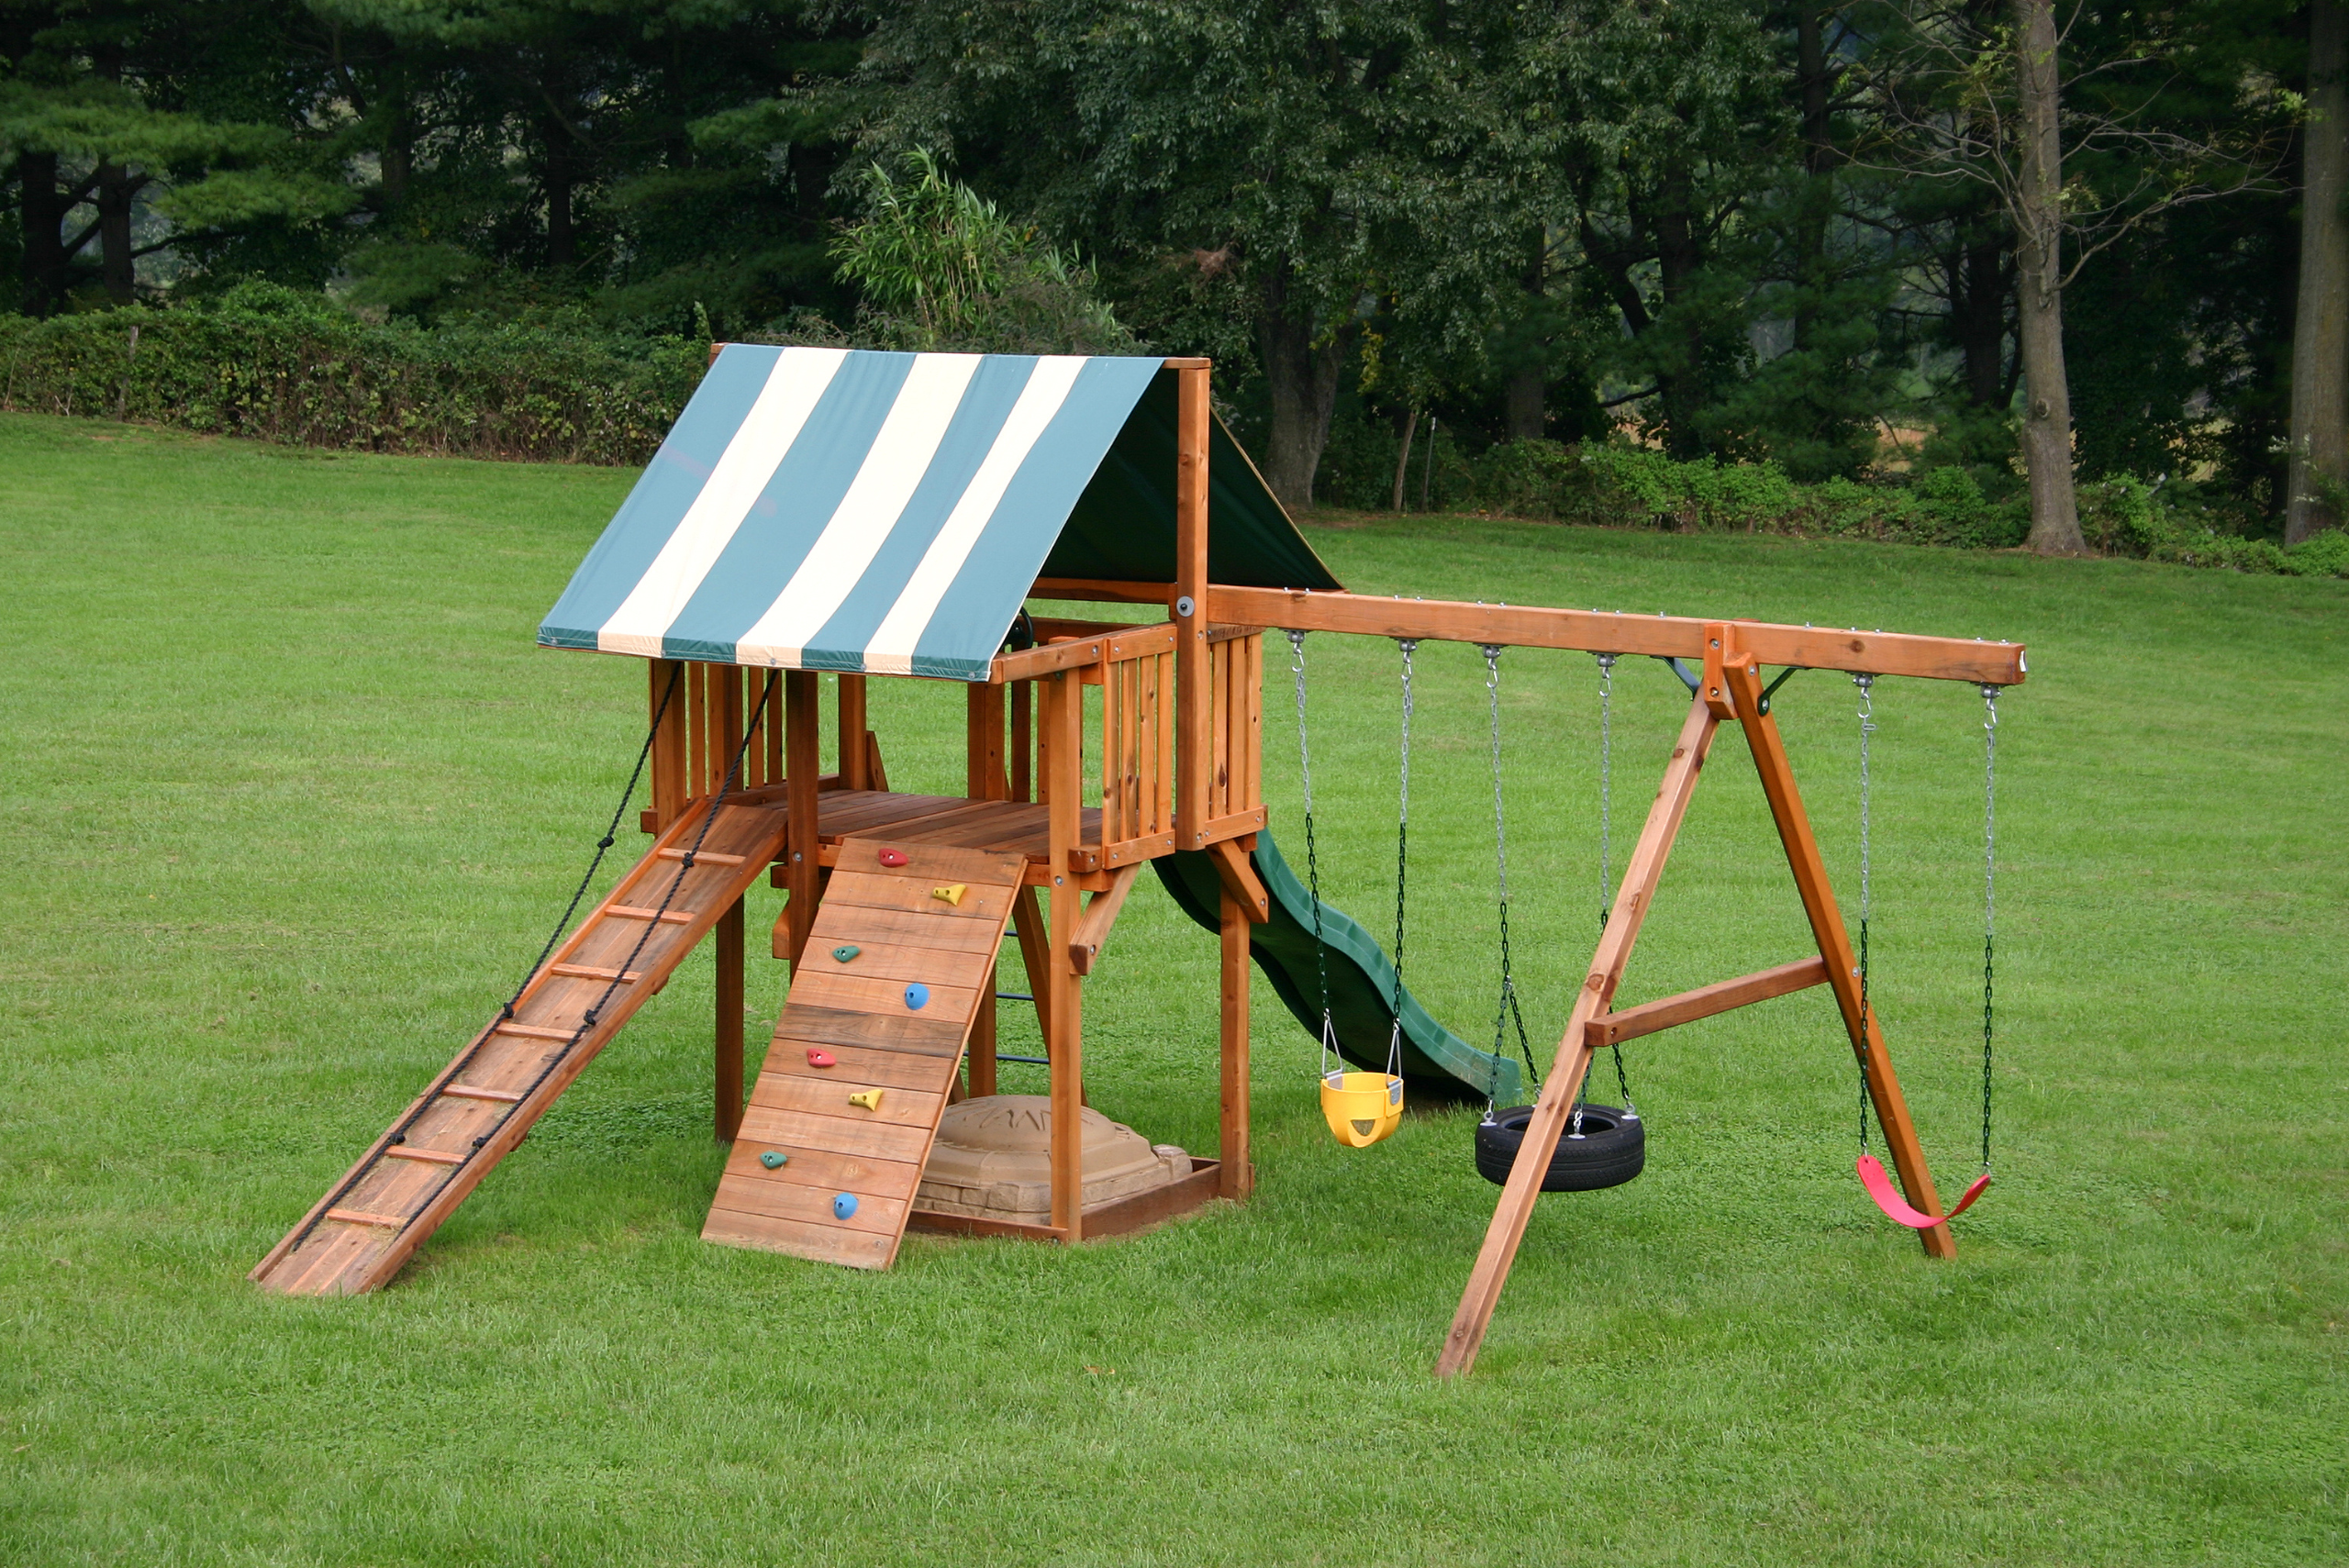 Swing set attached to a play ground, all made of wood.